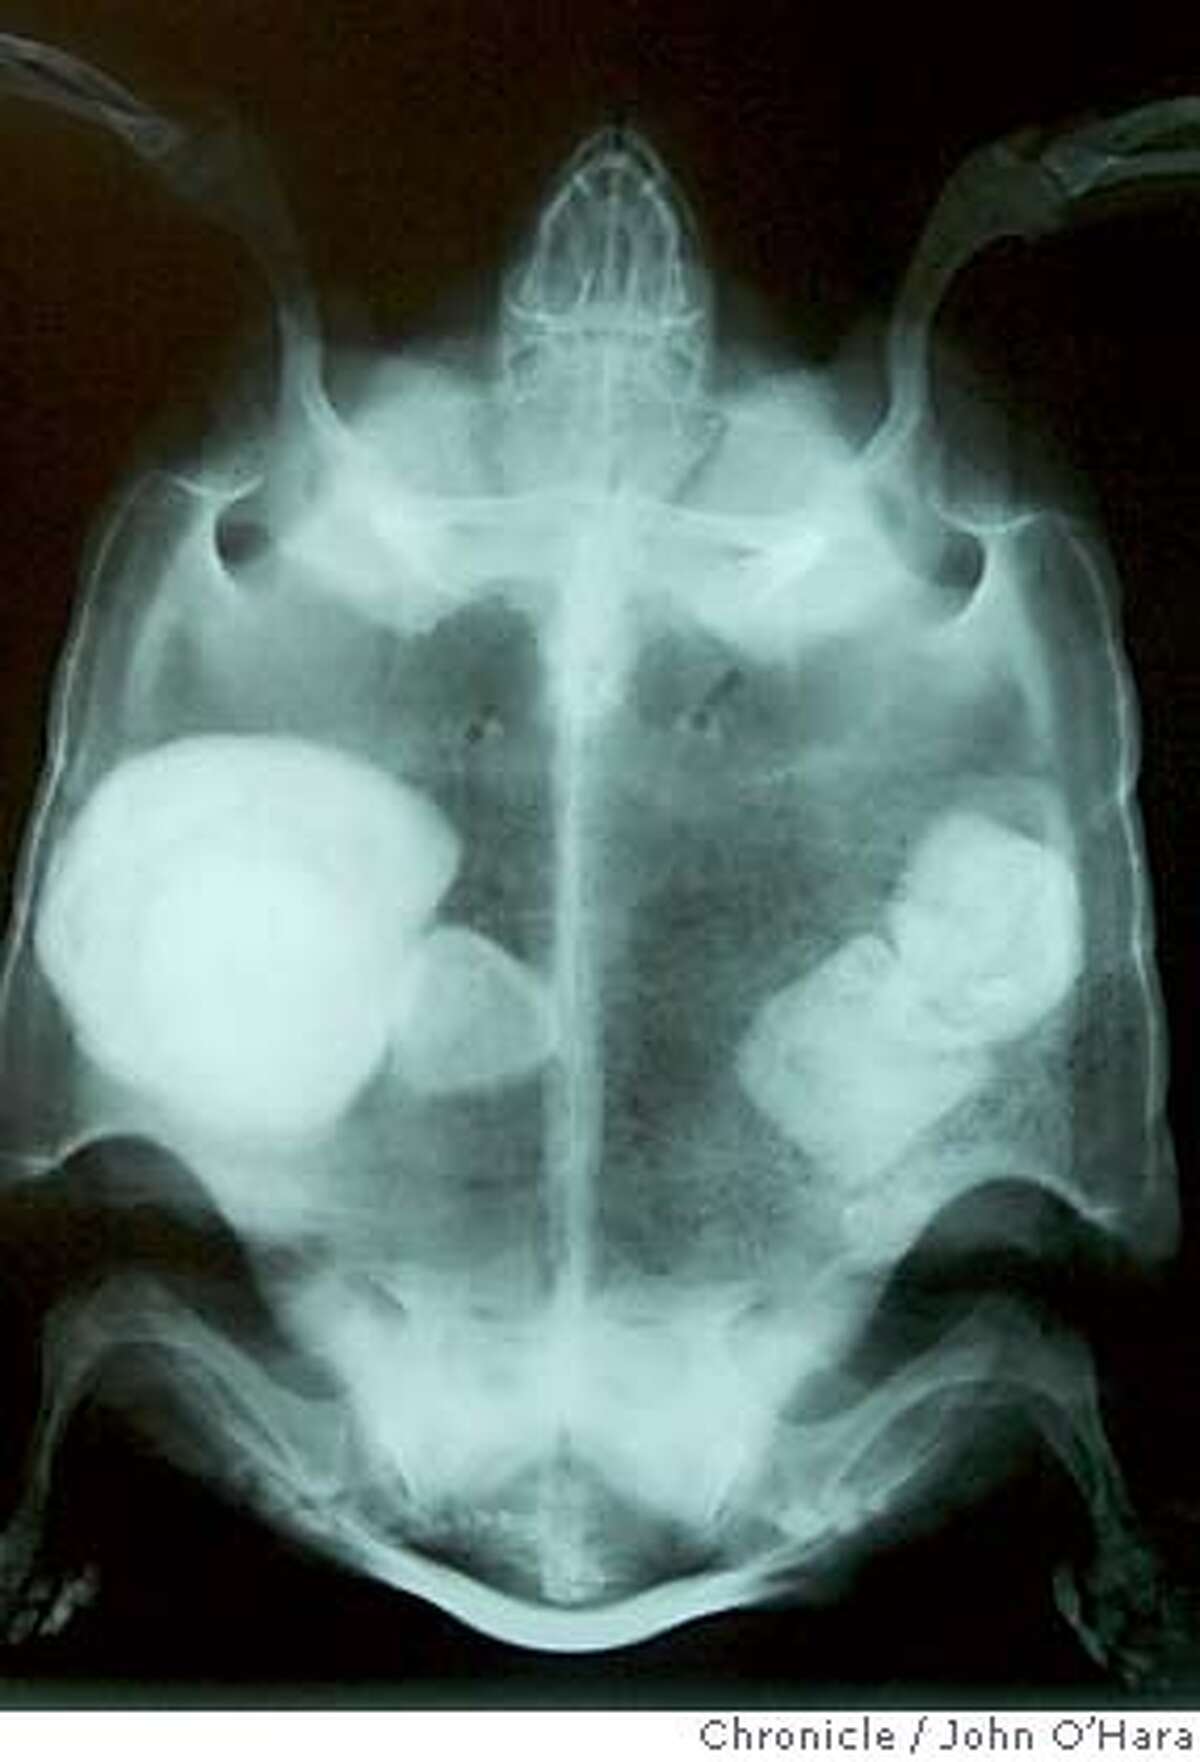 San Francisco Zoo. X-Ray of tortoise with stones showing , left and right Tortoise undergoes major surgery to remove bladder stones. Cactus, a 40 year old +- desert tortoise. This tortoise had four bladder stones. The stones were first discovered in 1994. Dr. Freeland Dunker with X-Rays and stones in lab. Megan Morse, An education specialist with "Cactus" showing the FIBERGLASS bandage where the surgery took place. It takes approx. two years to heal from the surgery. The stones collectivley weight 553 G. total